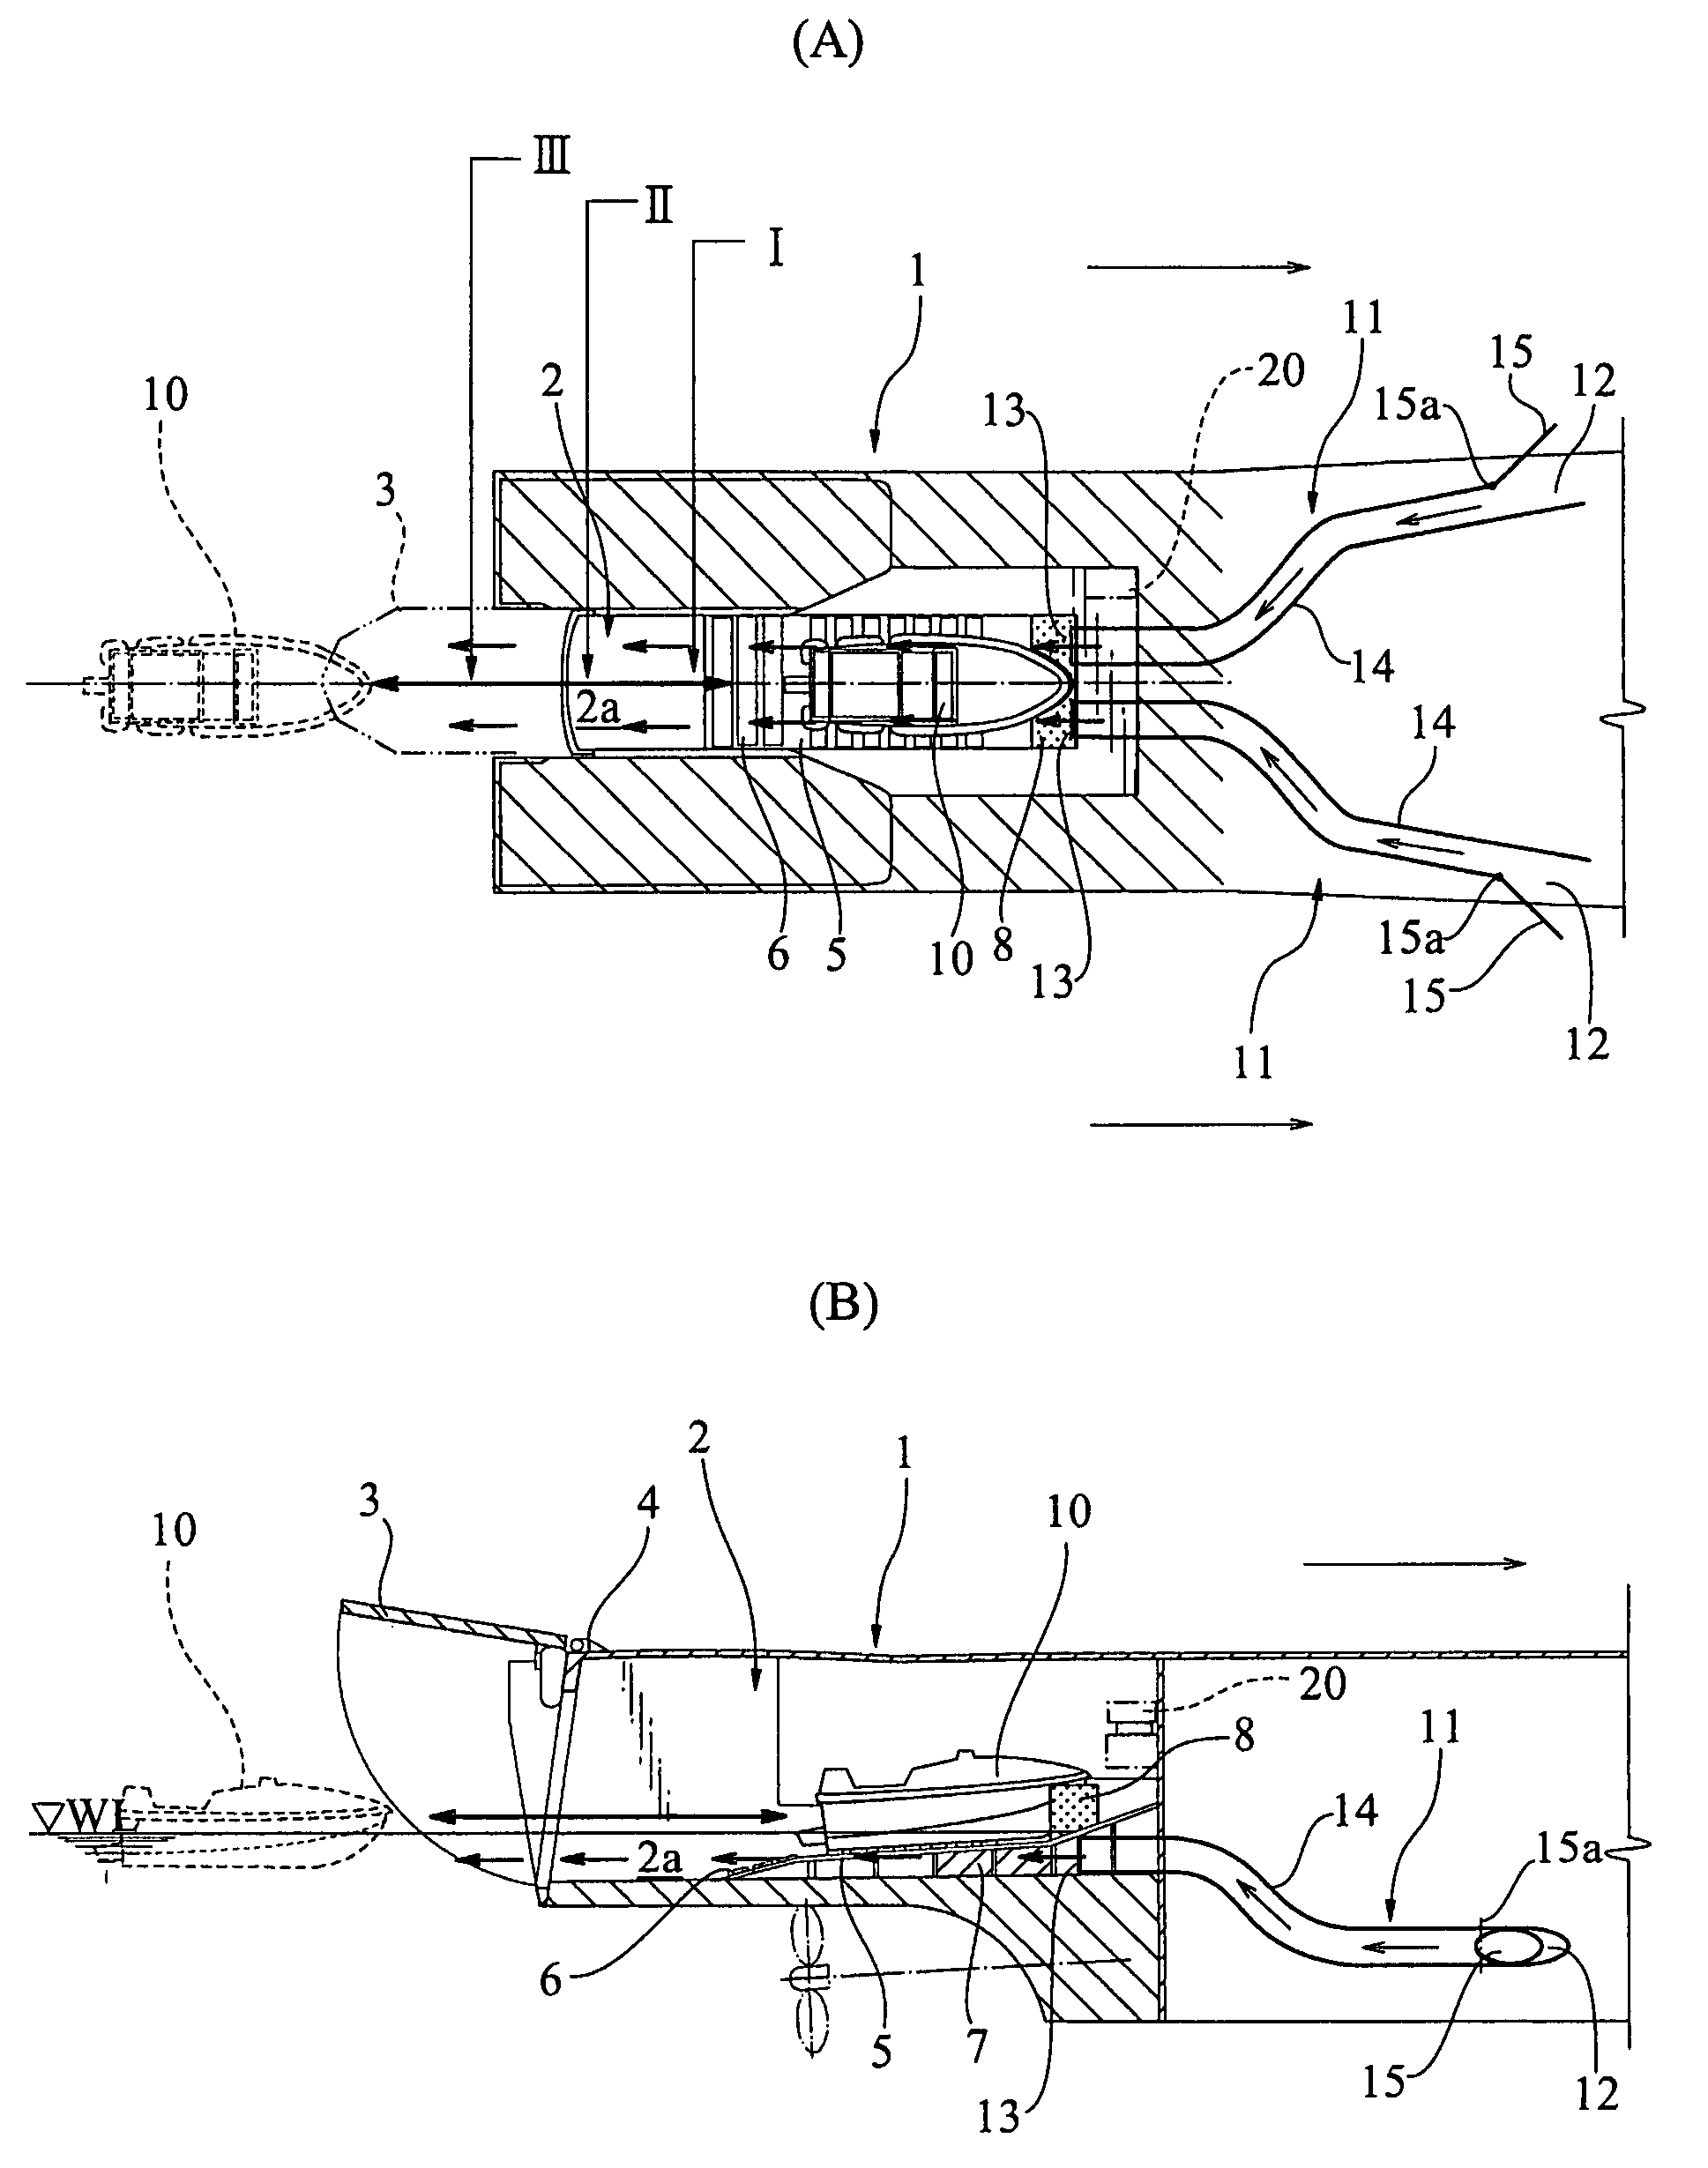 Apparatus and method for drop-down/lift-up boat mounted on marine vessel